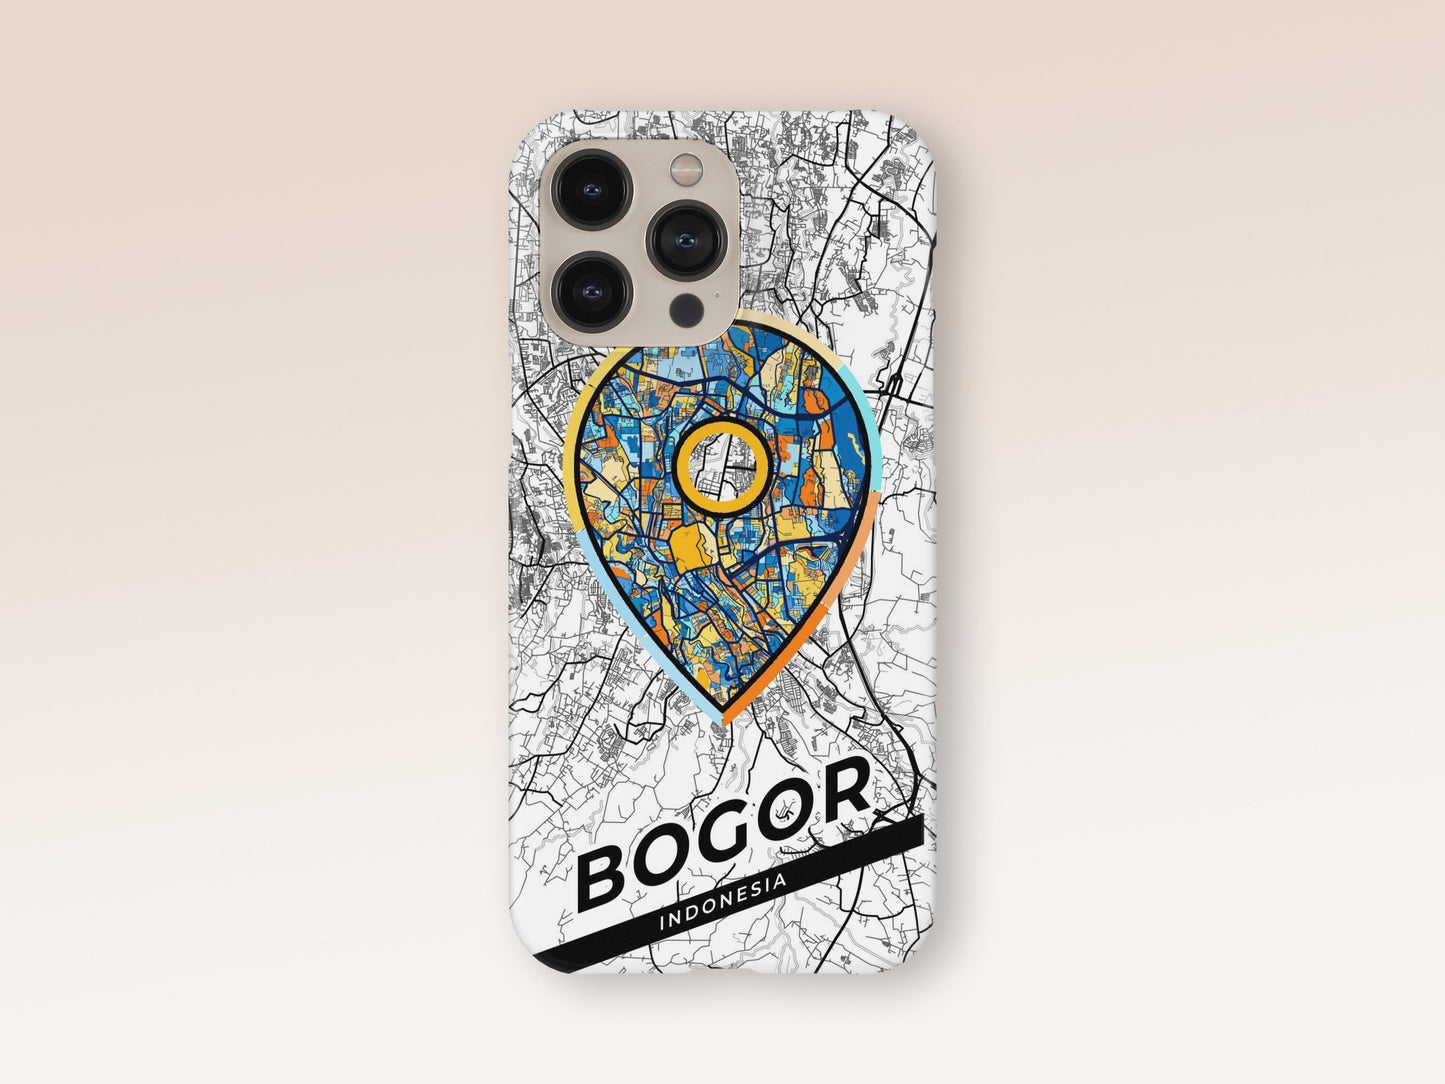 Bogor Indonesia slim phone case with colorful icon. Birthday, wedding or housewarming gift. Couple match cases. 1